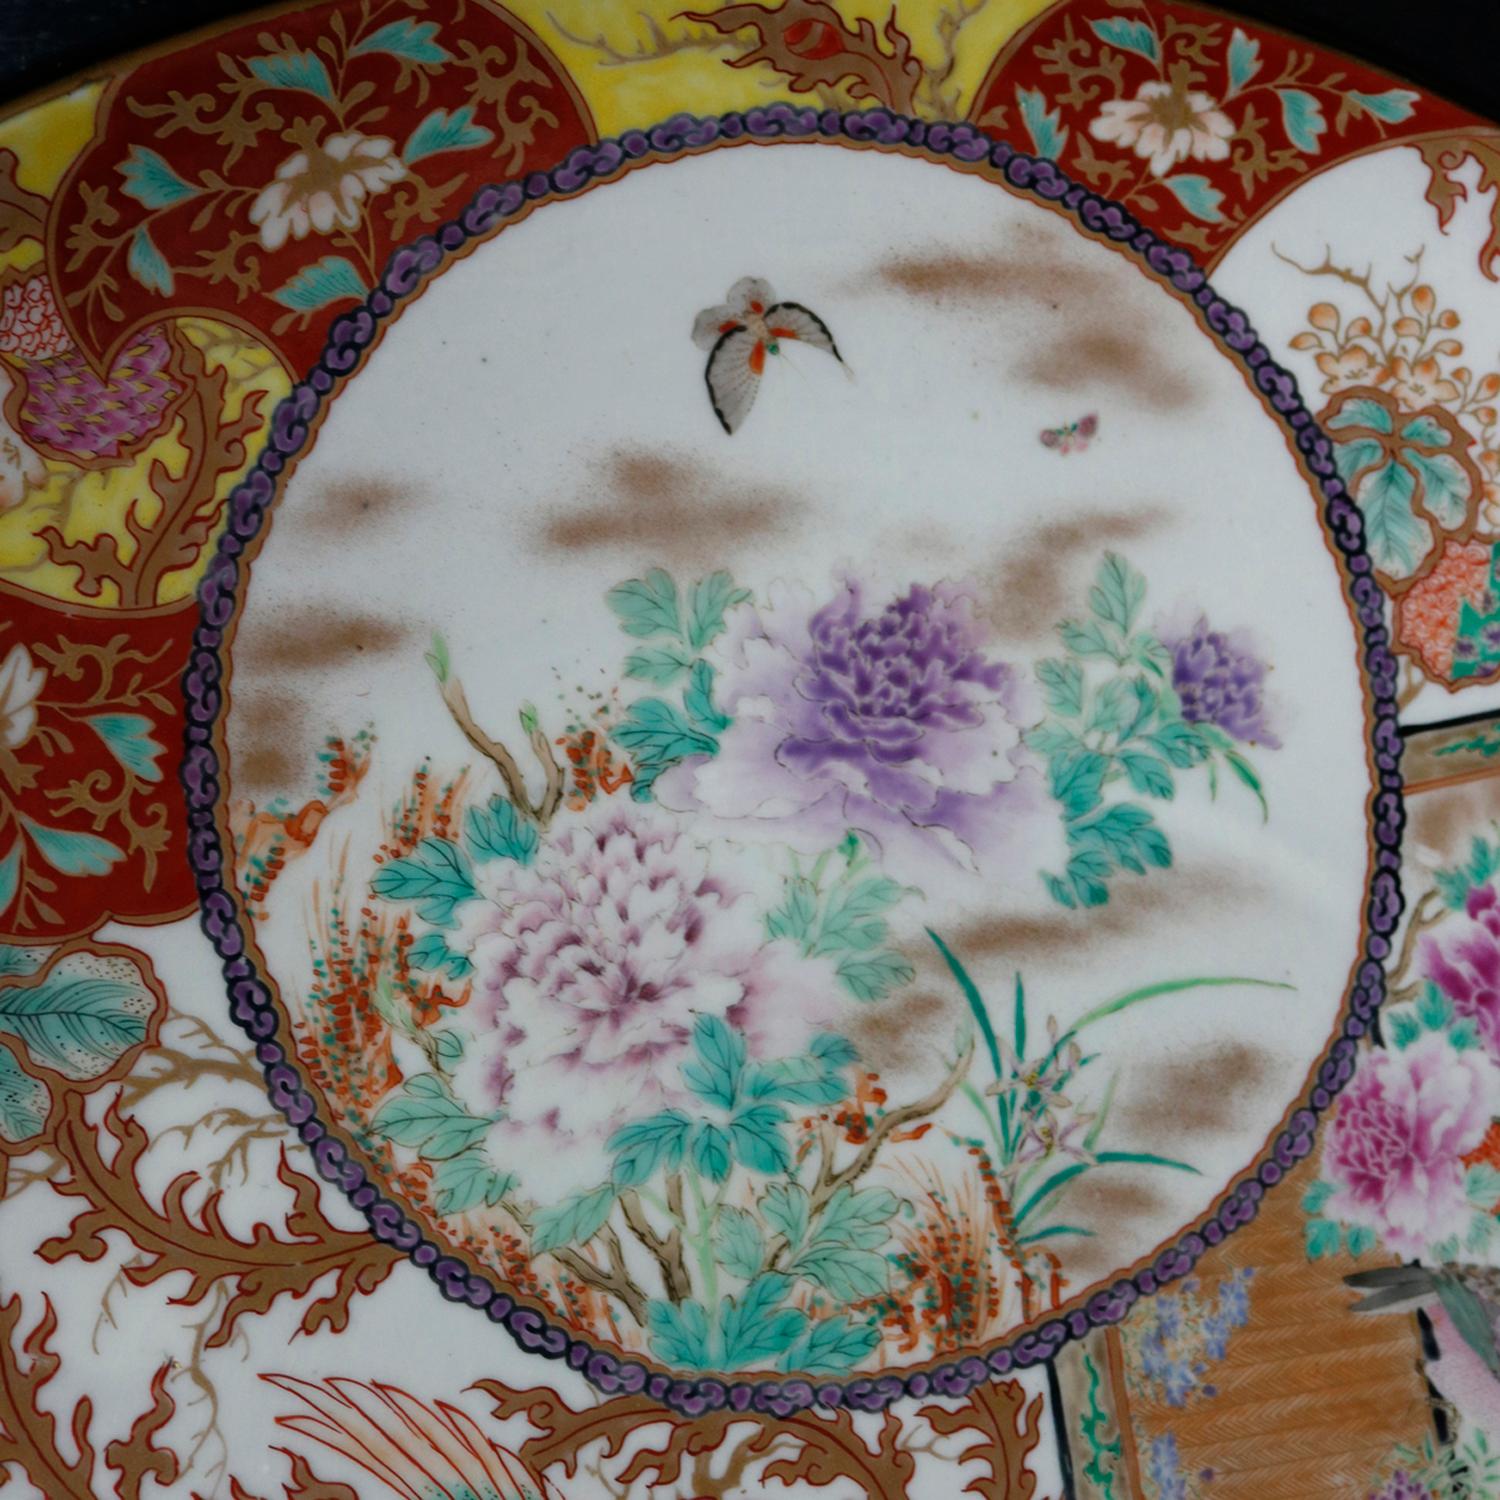 Antique Japanese Imari Meiji Charger by Hichozan Shinpo-sei offers hand enameled and gilt garen scene reserves with flowers and birds, en vers signed and with ragon decorated rim, seate in shadow box type ebonized frame, 19th century.
(Hichozan